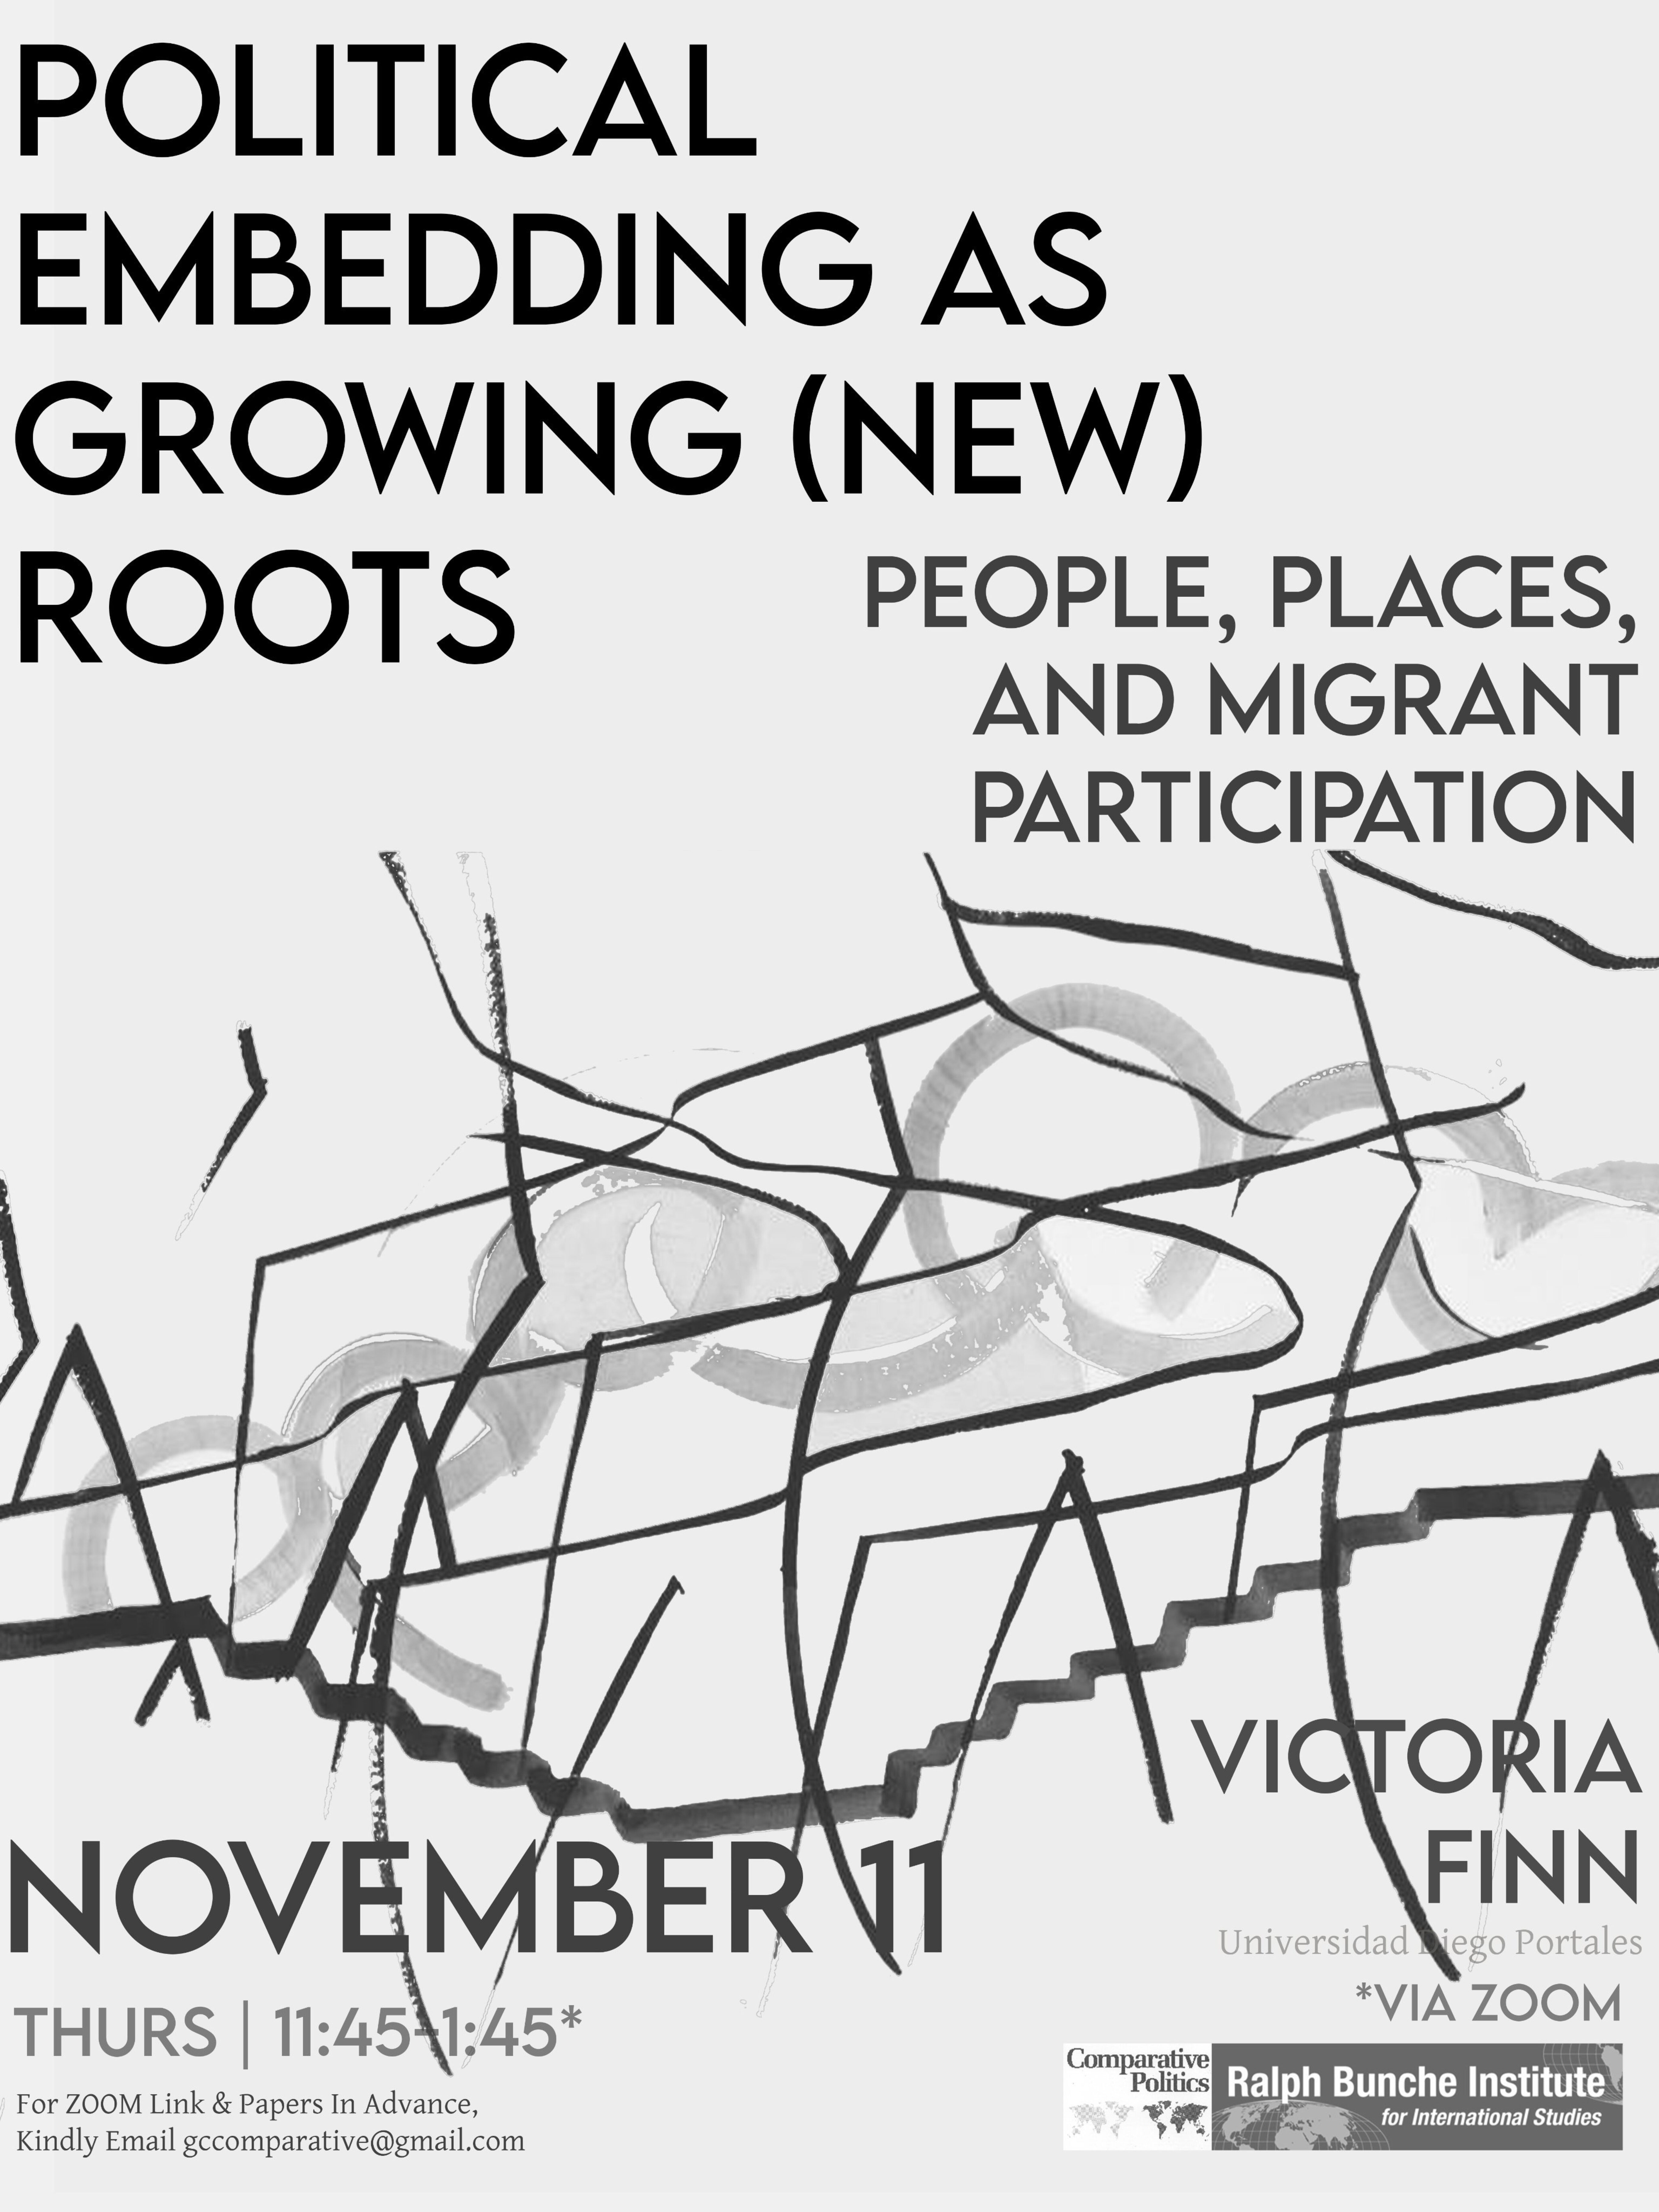 Comparative Politics Workshop: Victoria Finn, "Political Embedding as Growing (New) Roots: People, Places, and Migrant Participation," Thursday, November 11, 11:45AM–1:45PM EST